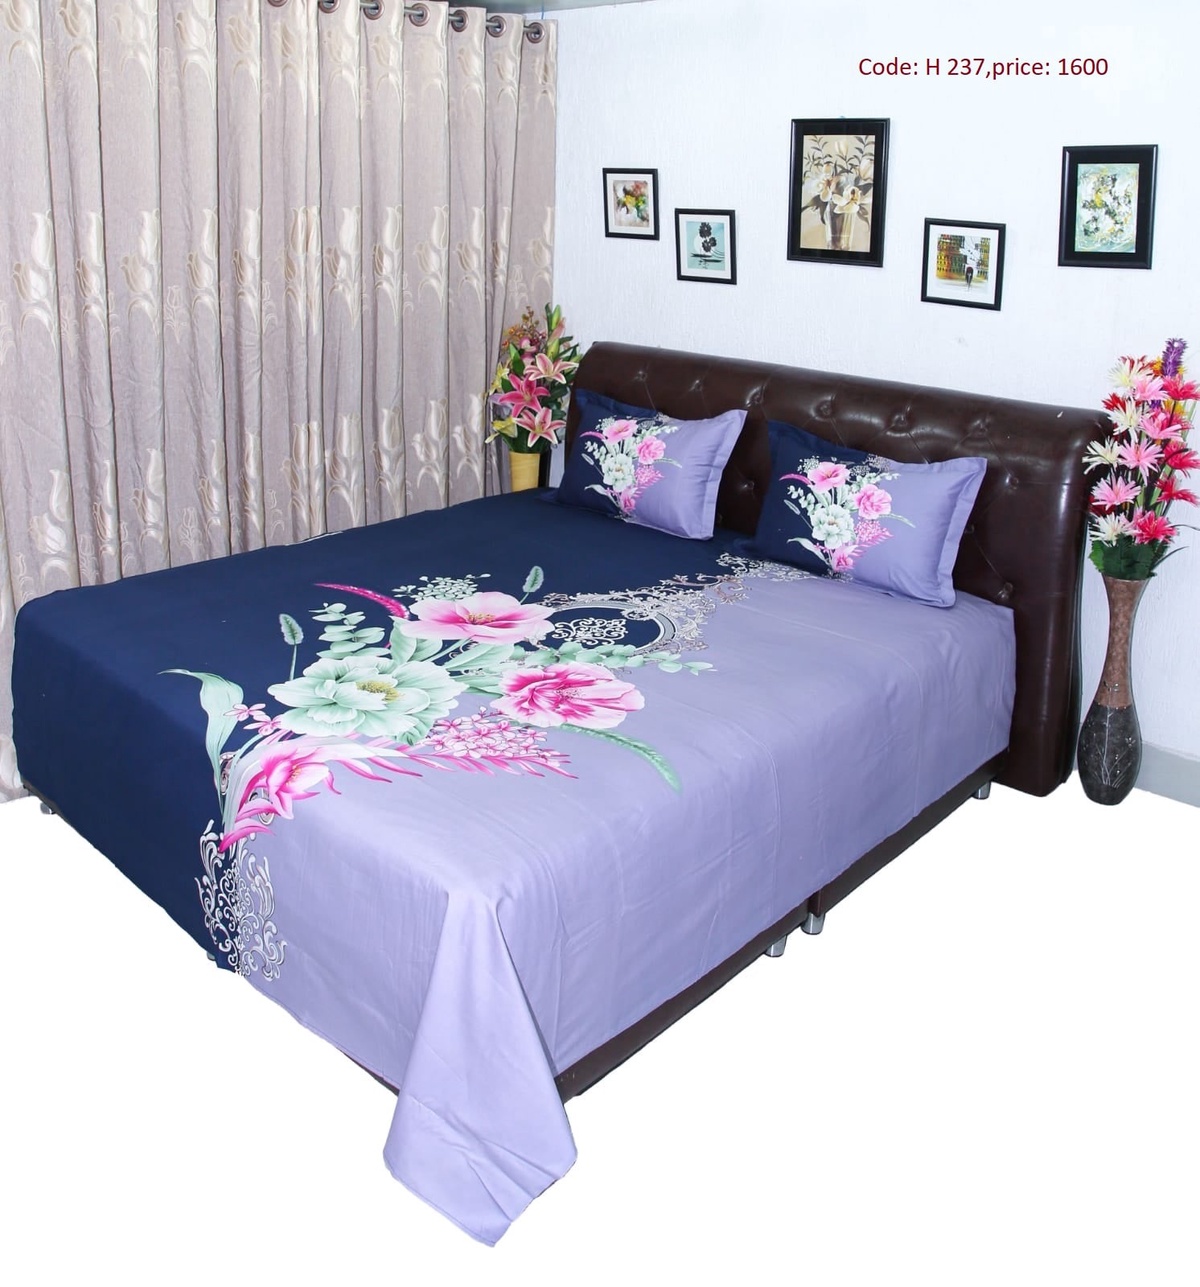 Searching for Top Bed Sheet In Bangladesh: just go hometexltd.com